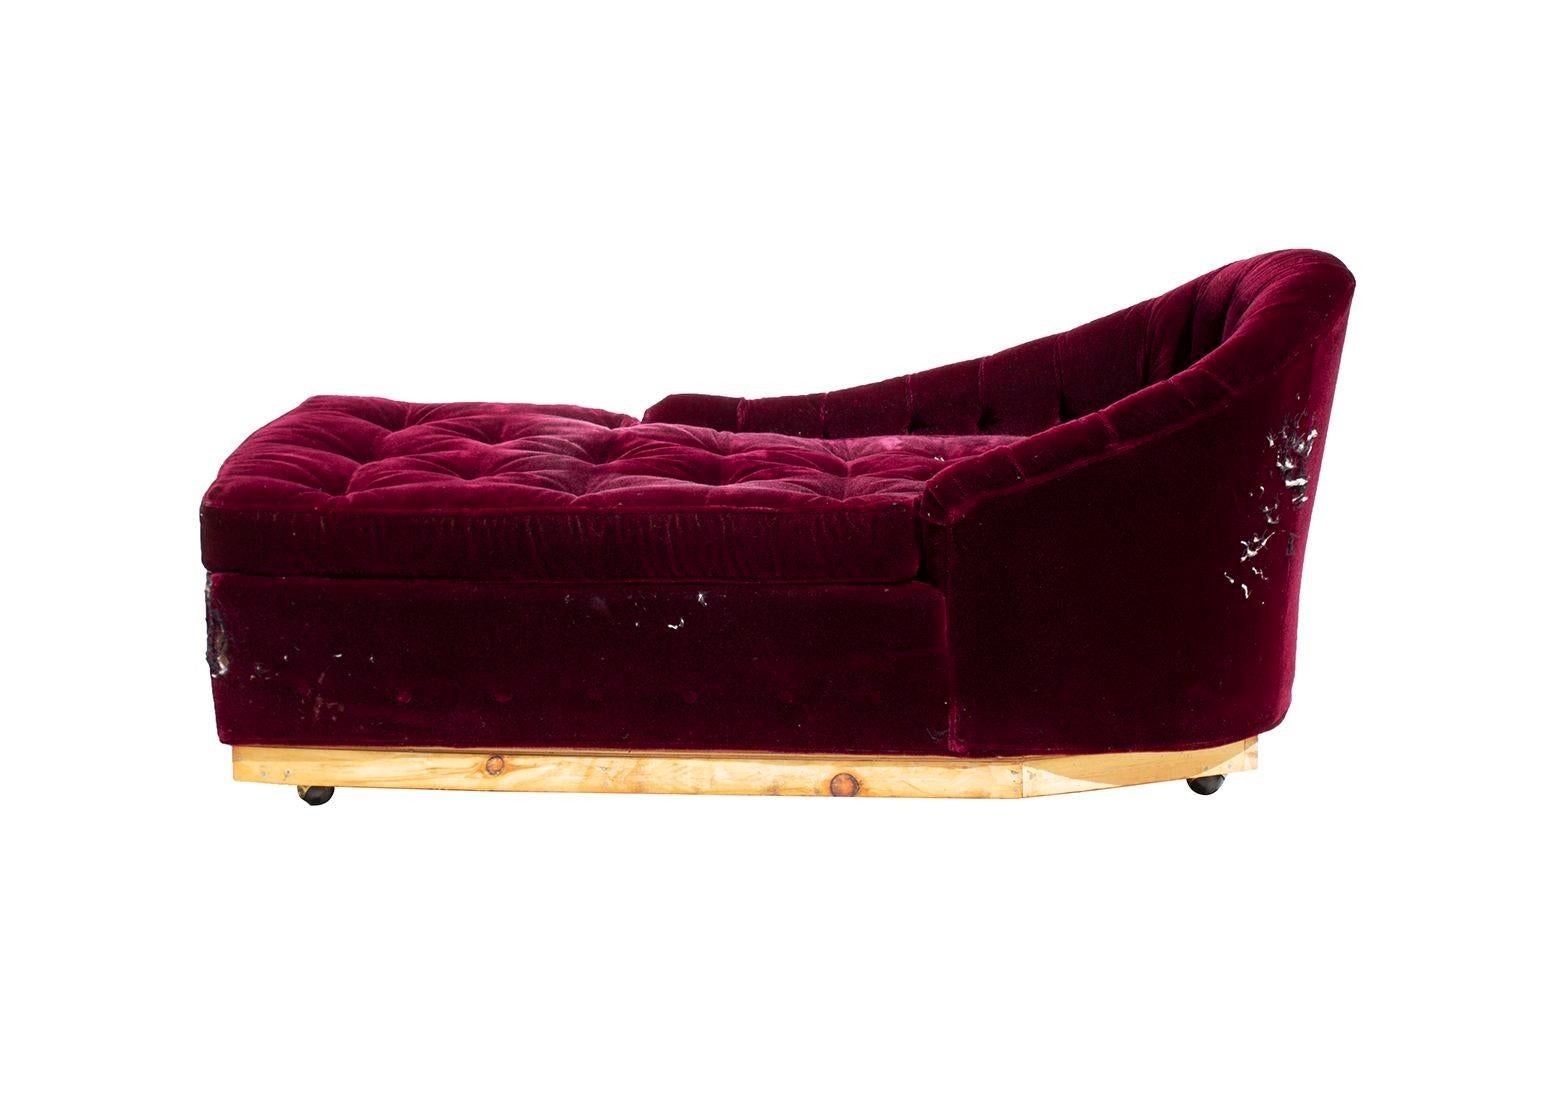 USA, 1940s
Vintage chaise lounge with button tufted upholstery in heavily worn and torn burgundy velvet. Gorgeous uneven arms offer entry on the left side of the chaise. This has what appears to be a non original plinth style base. I removed faux